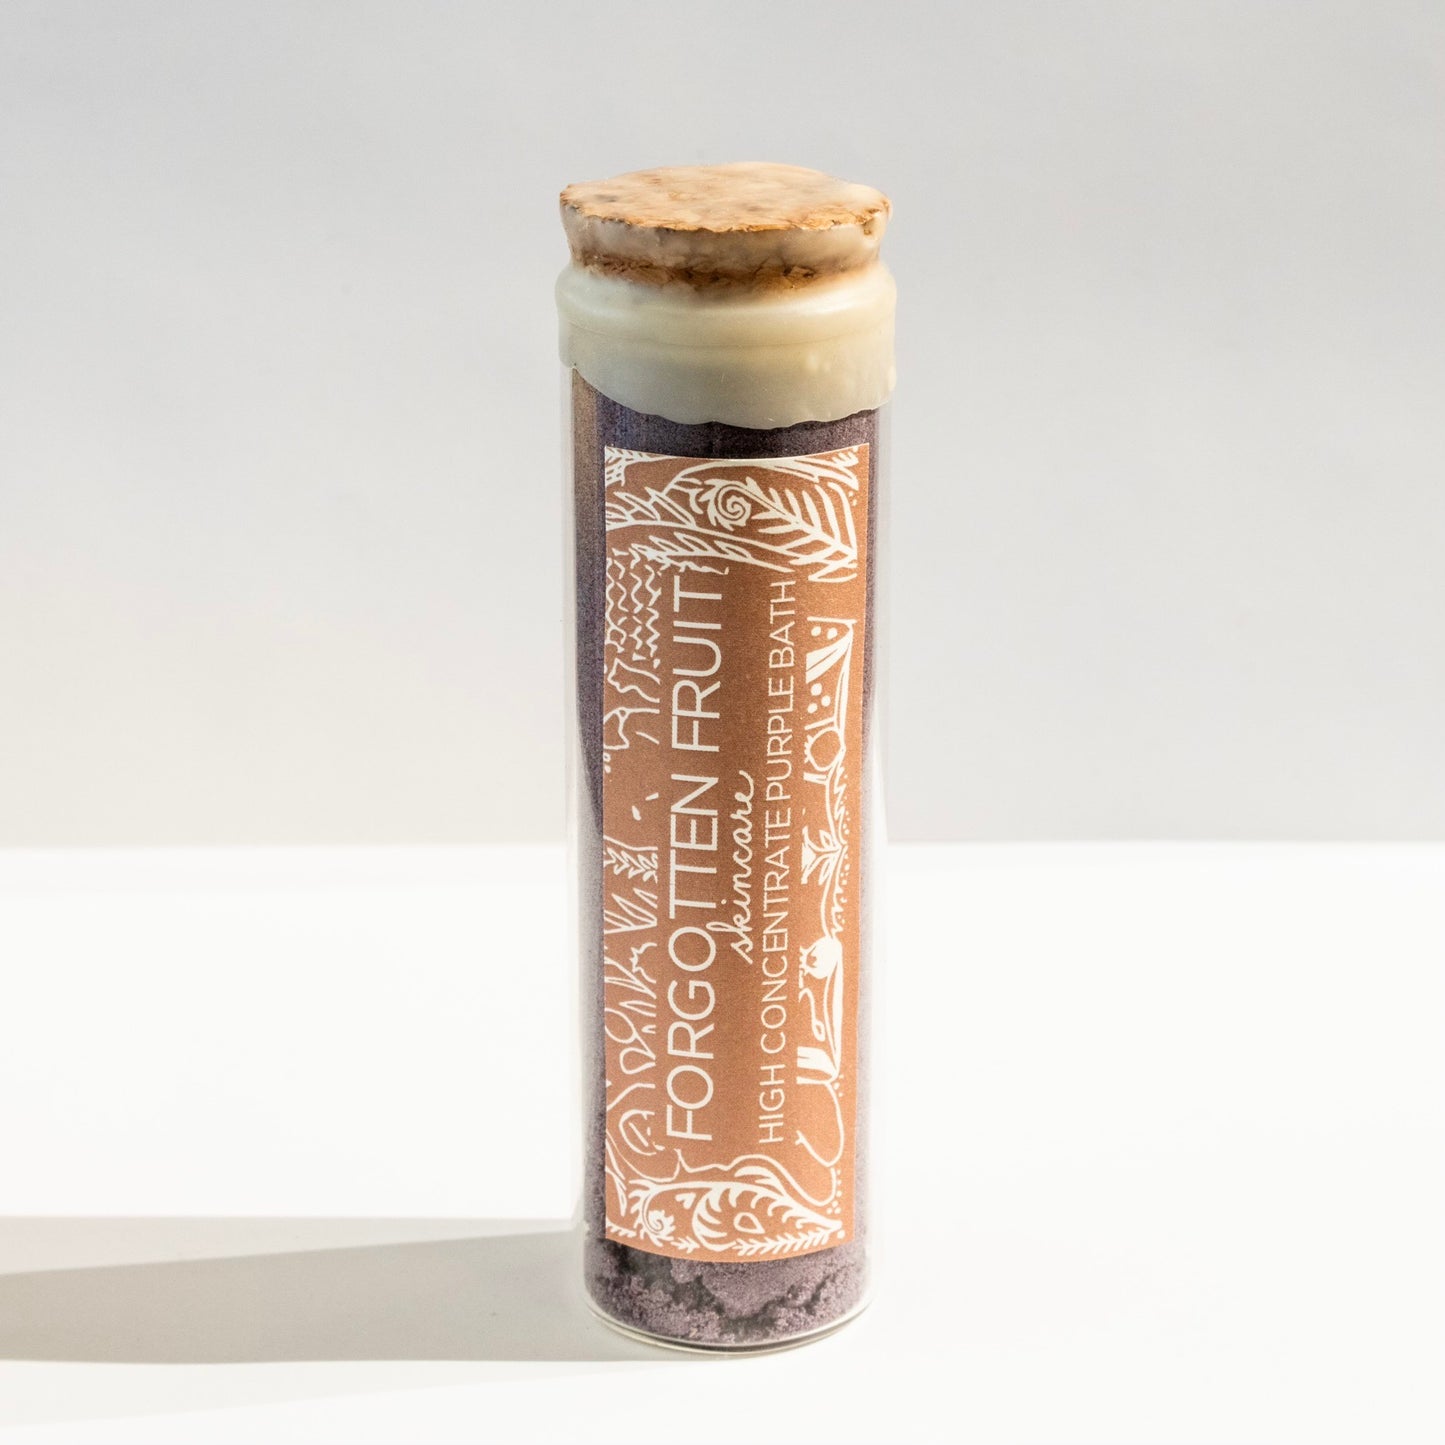 Forgotten Fruit's High Concentrate Purple Bath in a glass vial with wax seal.